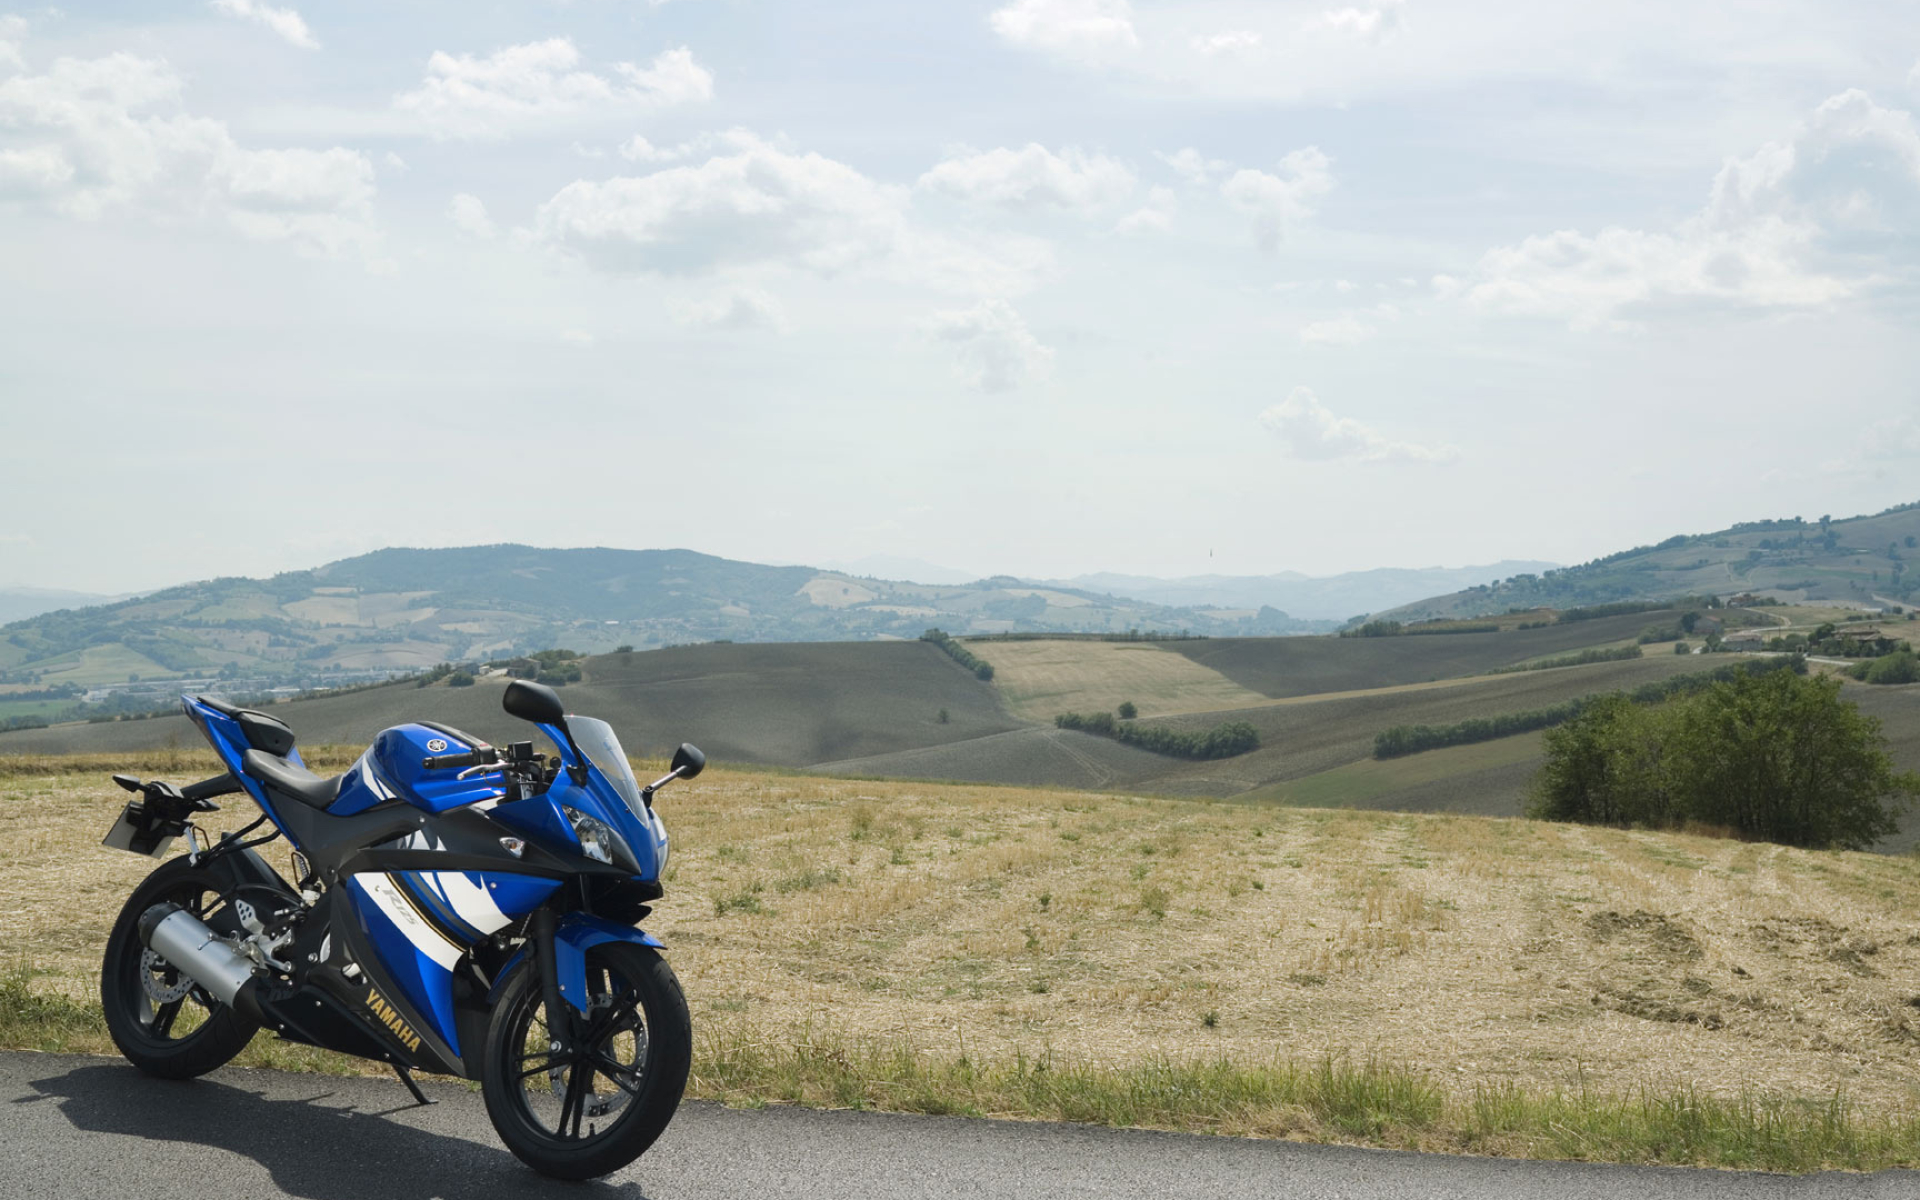 Yamaha YZF-R125, Side of the road, Wallpaper motorcycle, Wallpapers, 1920x1200 HD Desktop